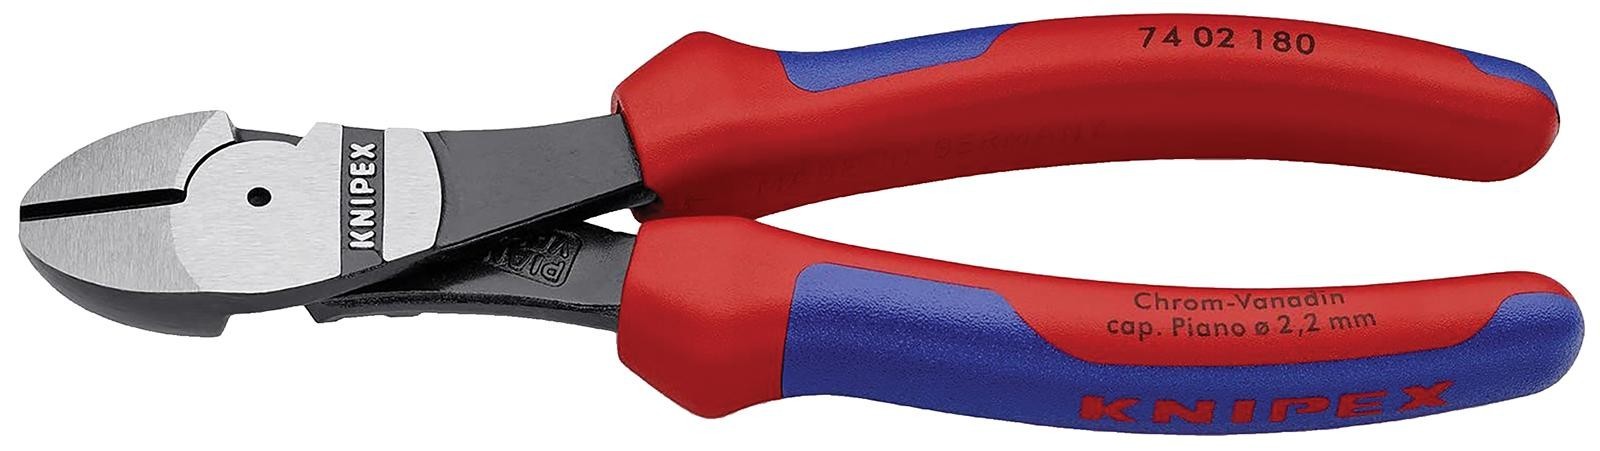 Knipex 74 02 180 Cutter, Side, 180mm